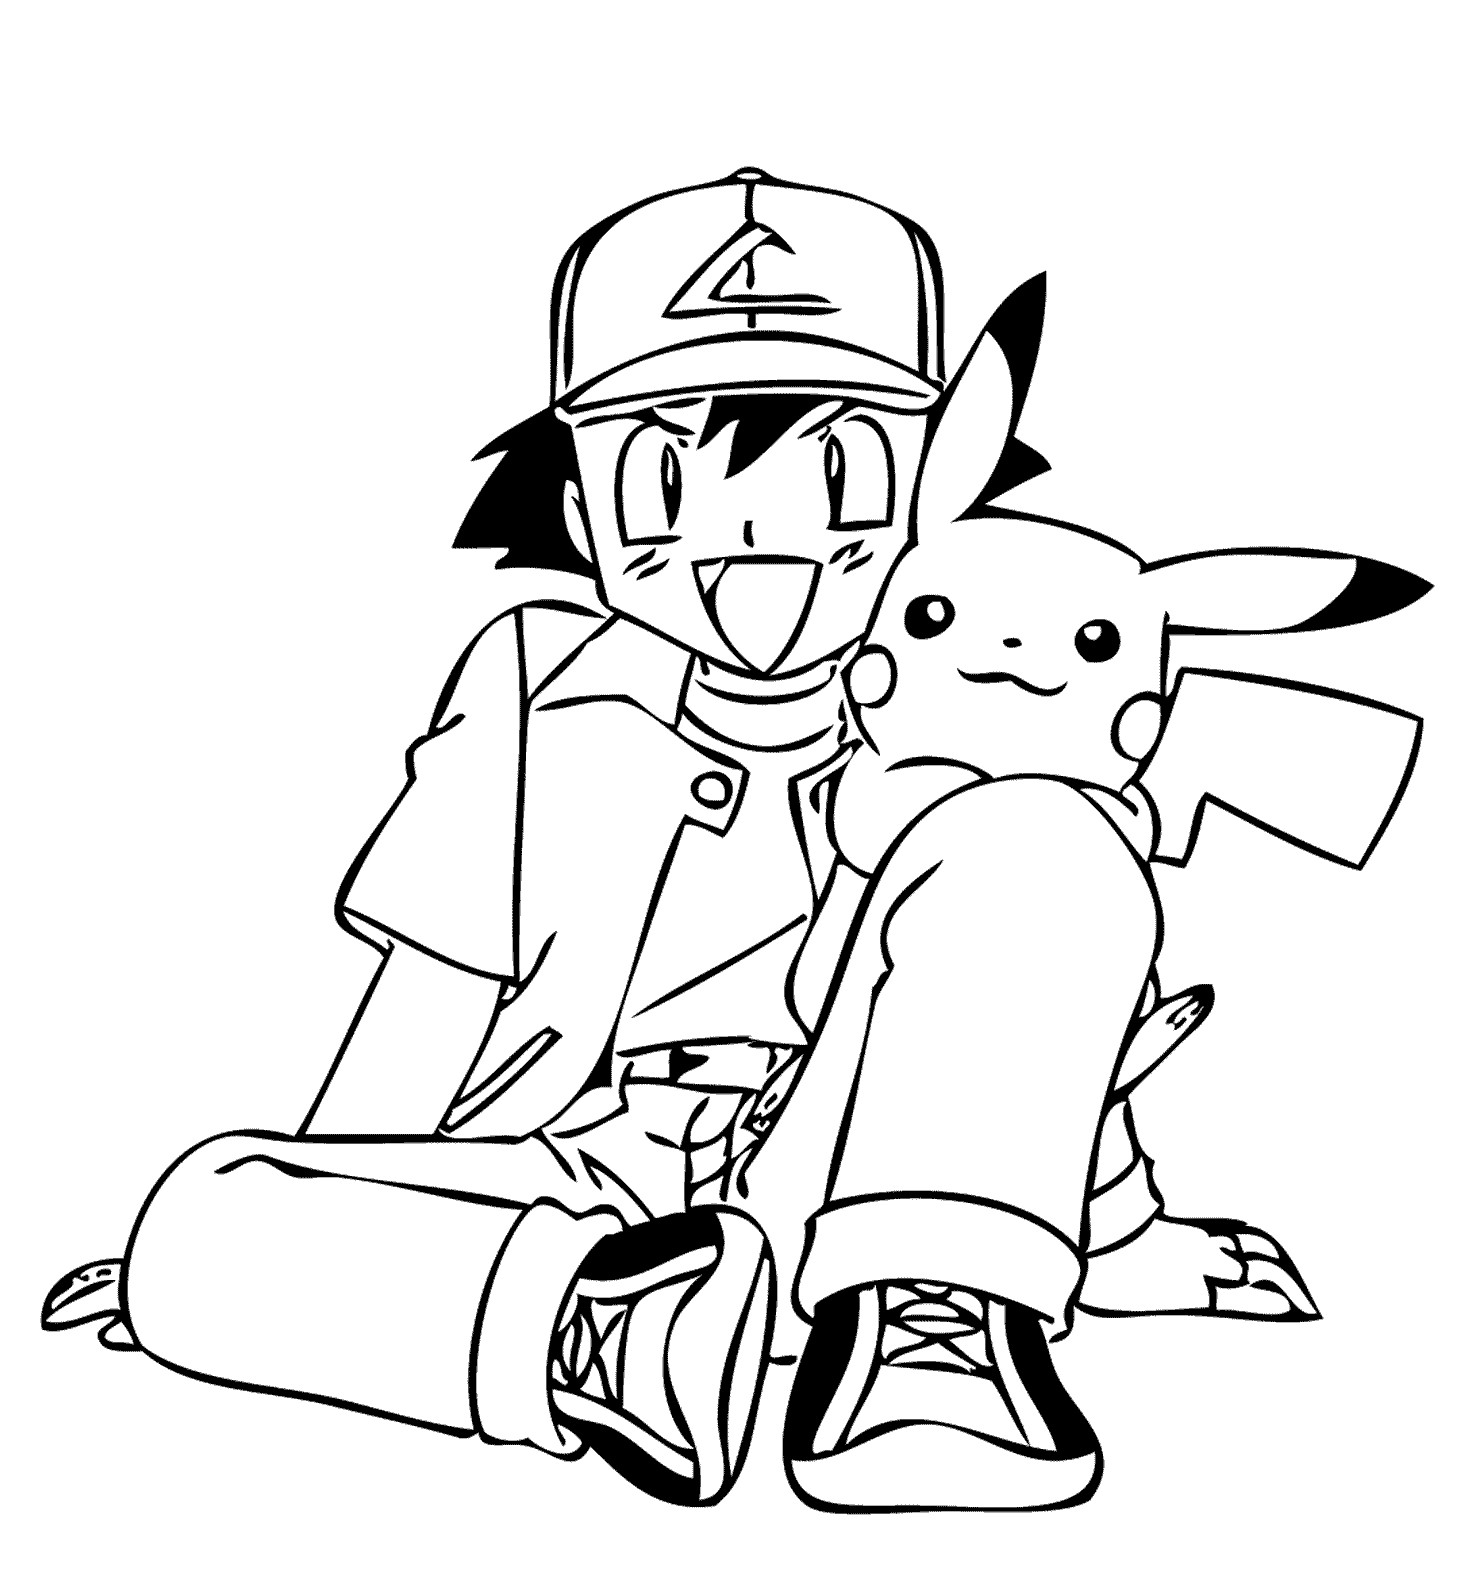 Dark Pokemon Coloring Pages For Boys
 Friends from Pokemon anime coloring pages for kids